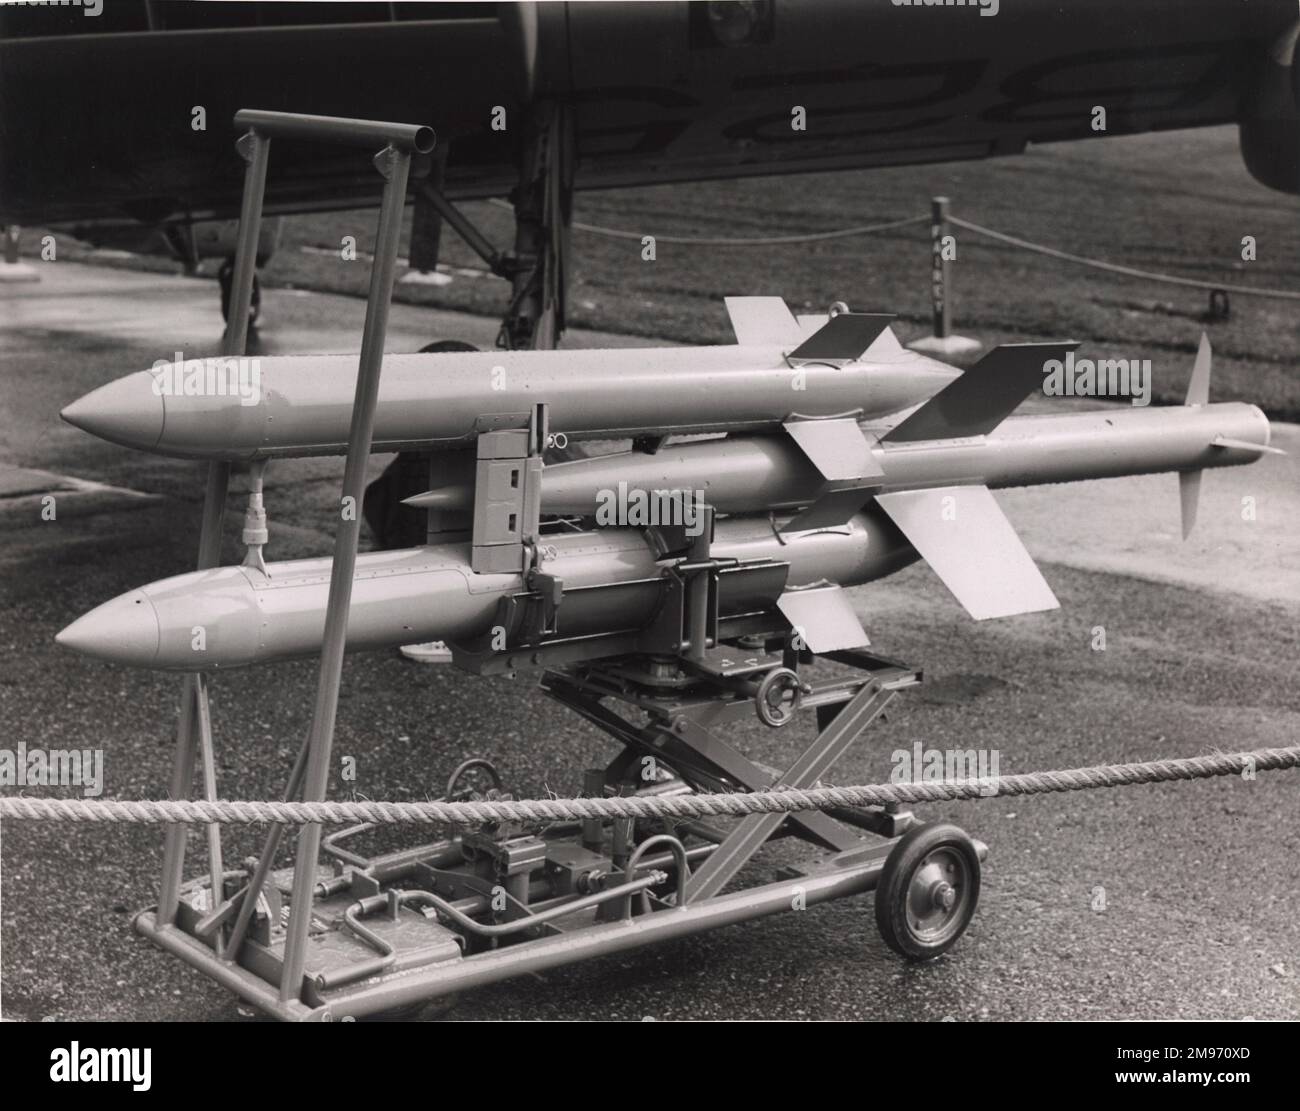 Fairey Fireflash air-to-air missile on its ground handling trolley. Stock Photo